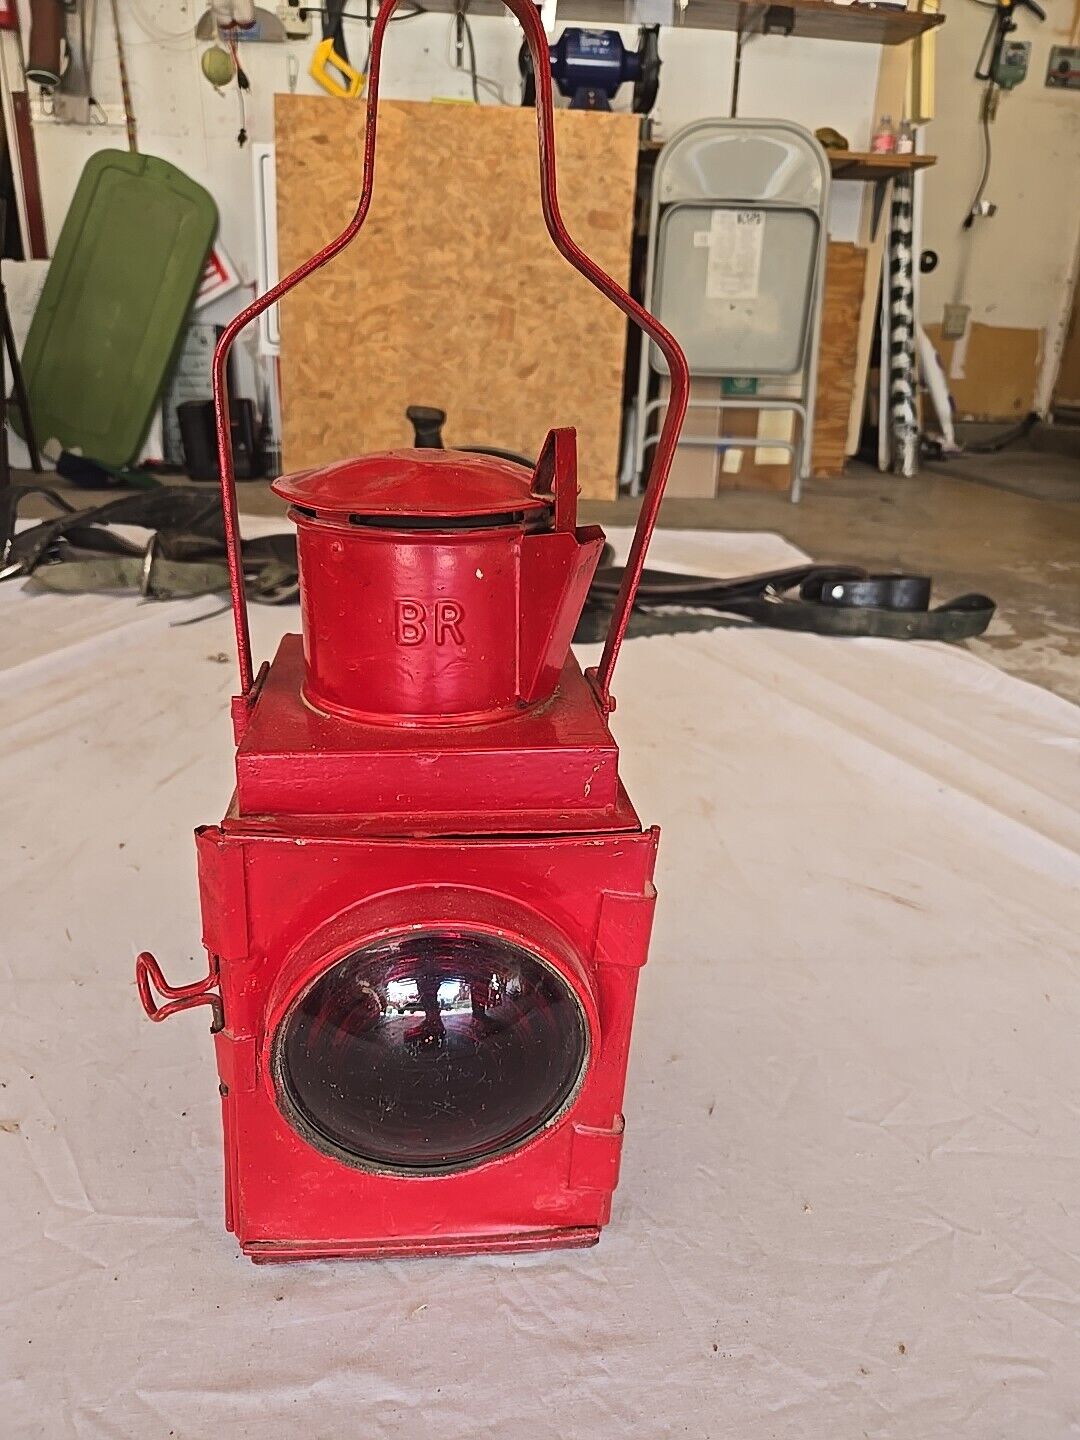 Vintage Red Metal Railway Lantern with Handle And Gas Hose [replica]